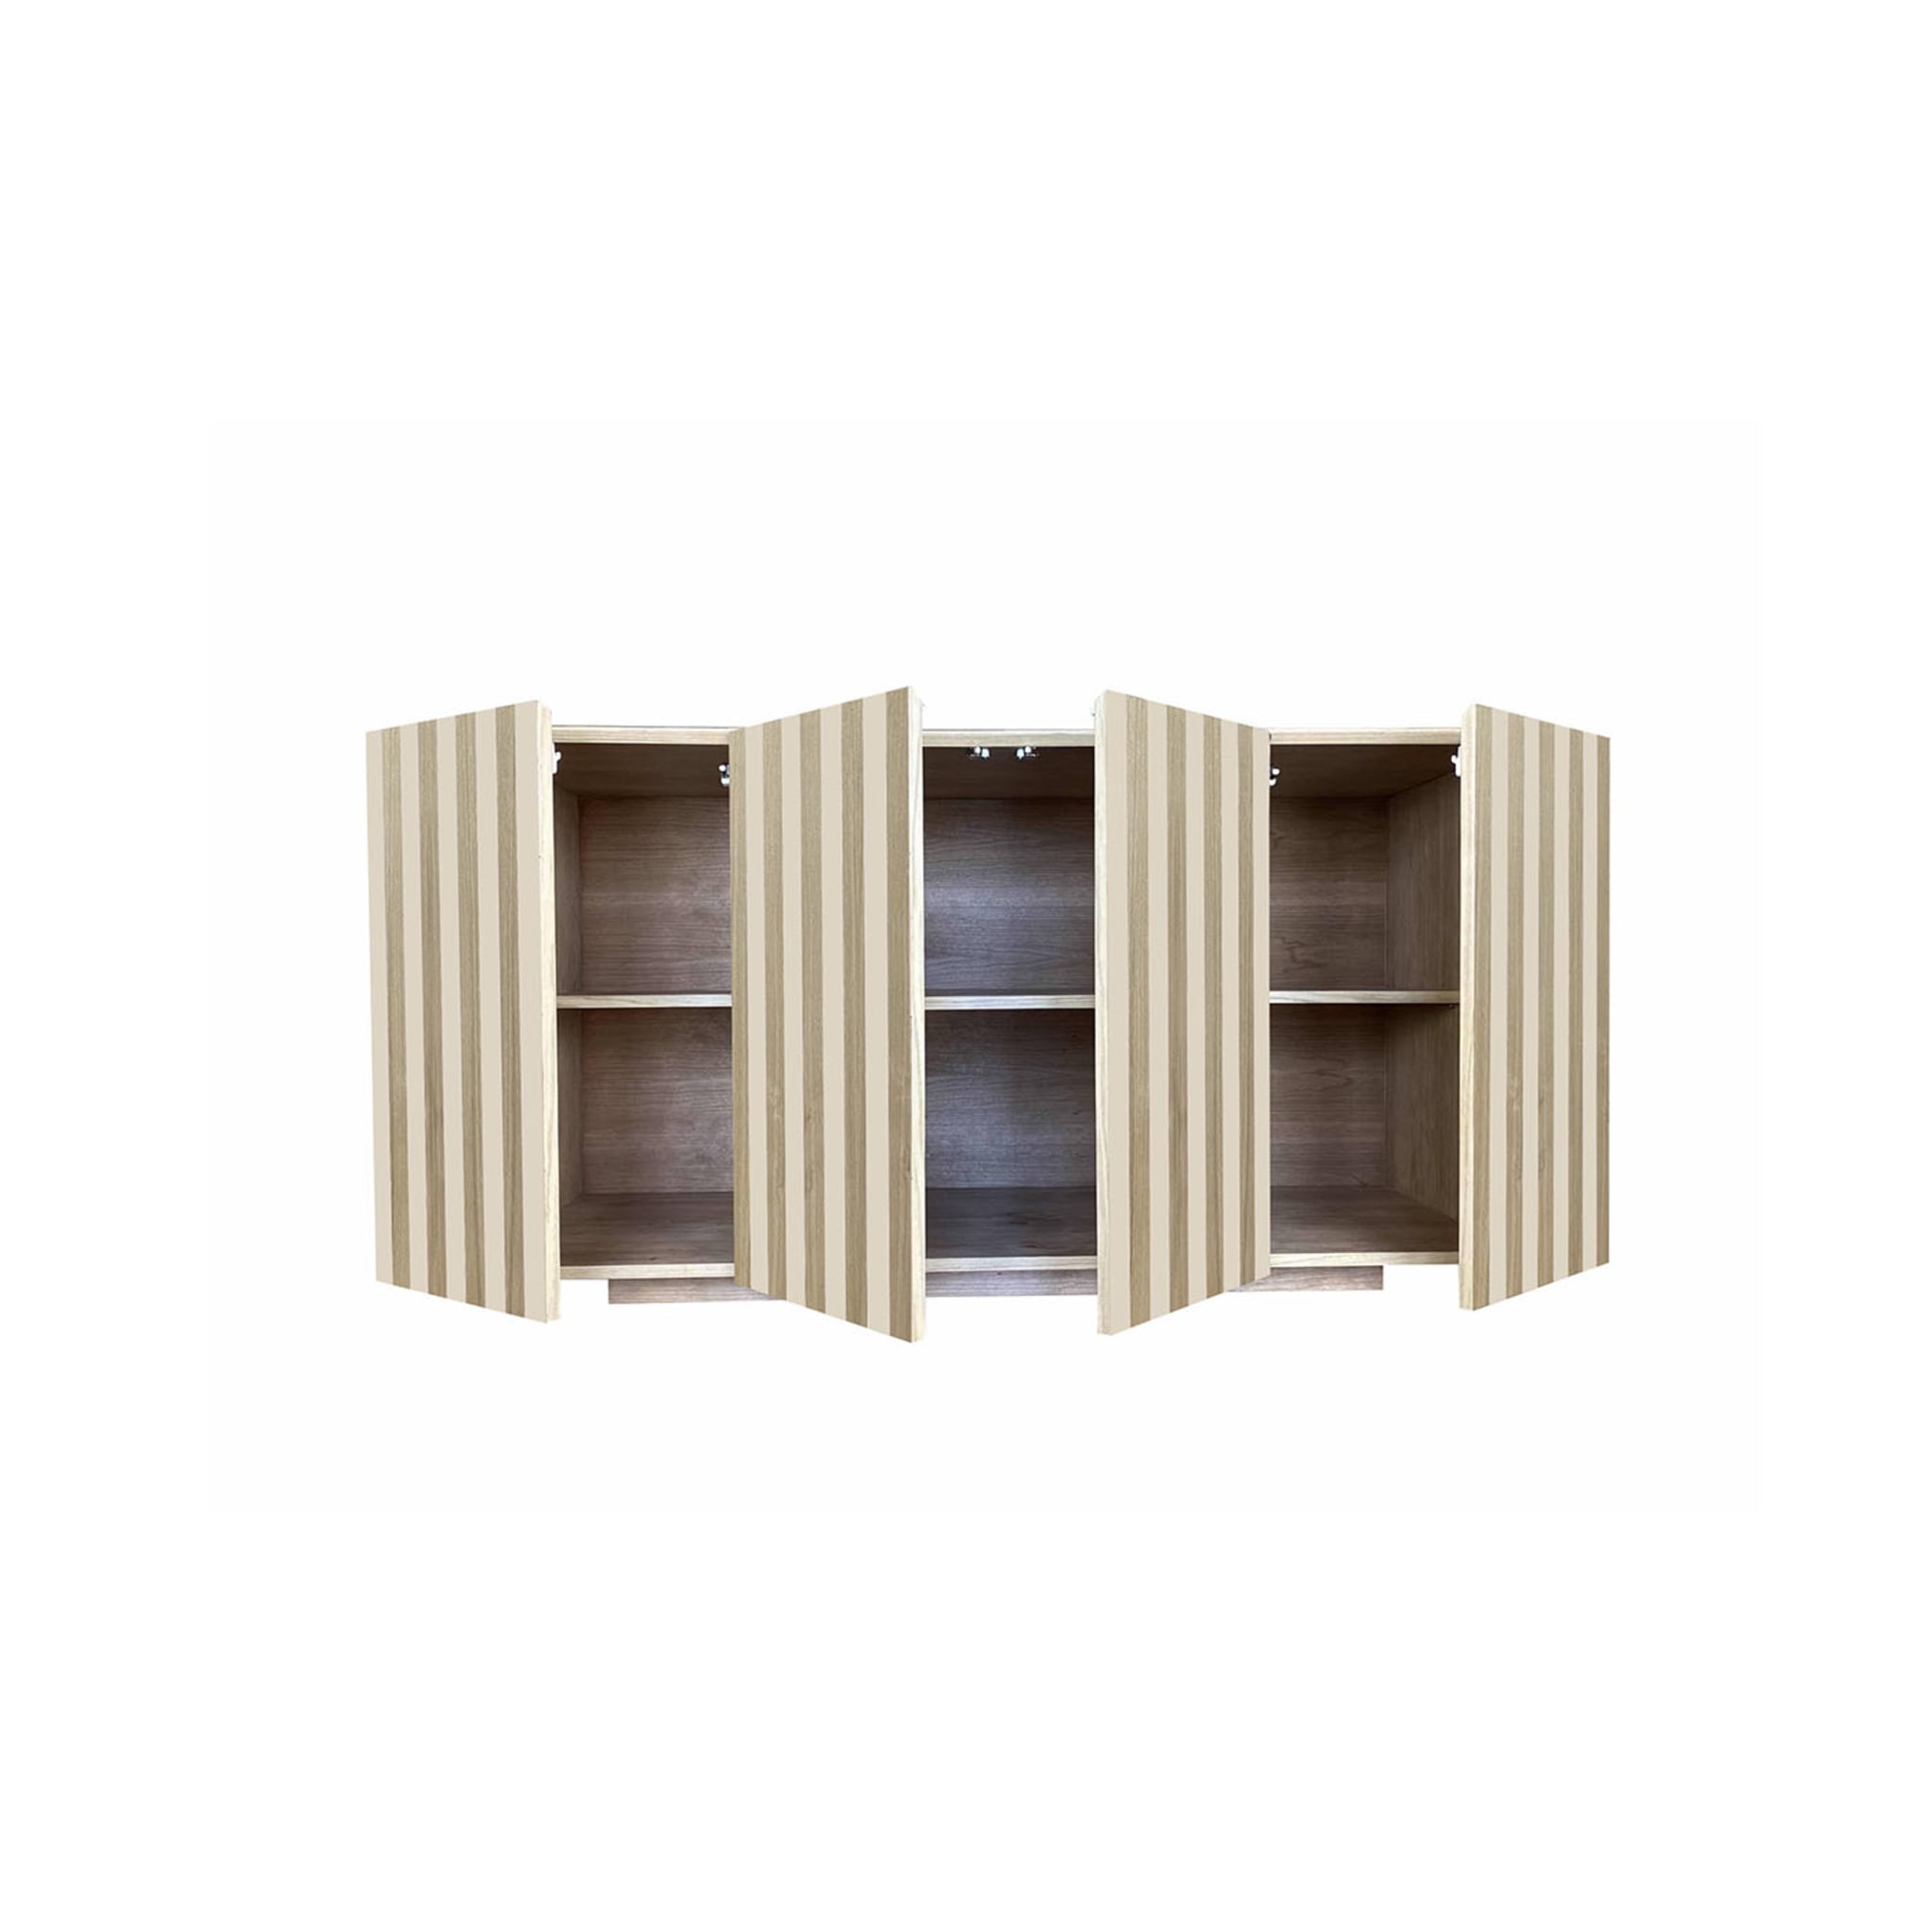 Md4 4-Door Striped Sideboard by Meccani Studio - Alternative view 4